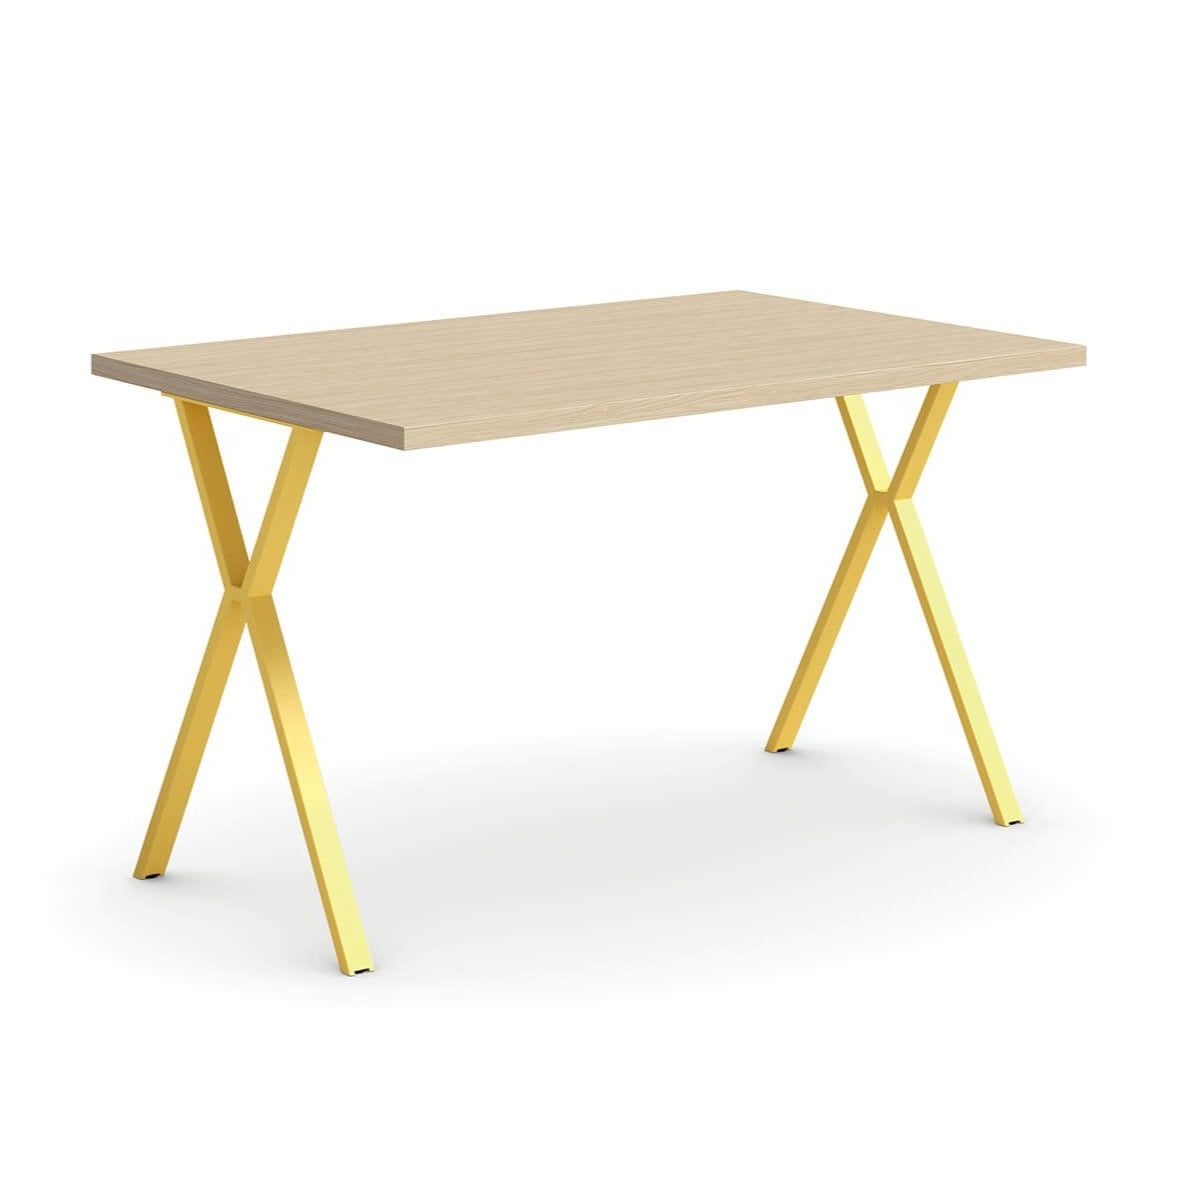 Children’s Desk by Nidi with Clessidra Legs